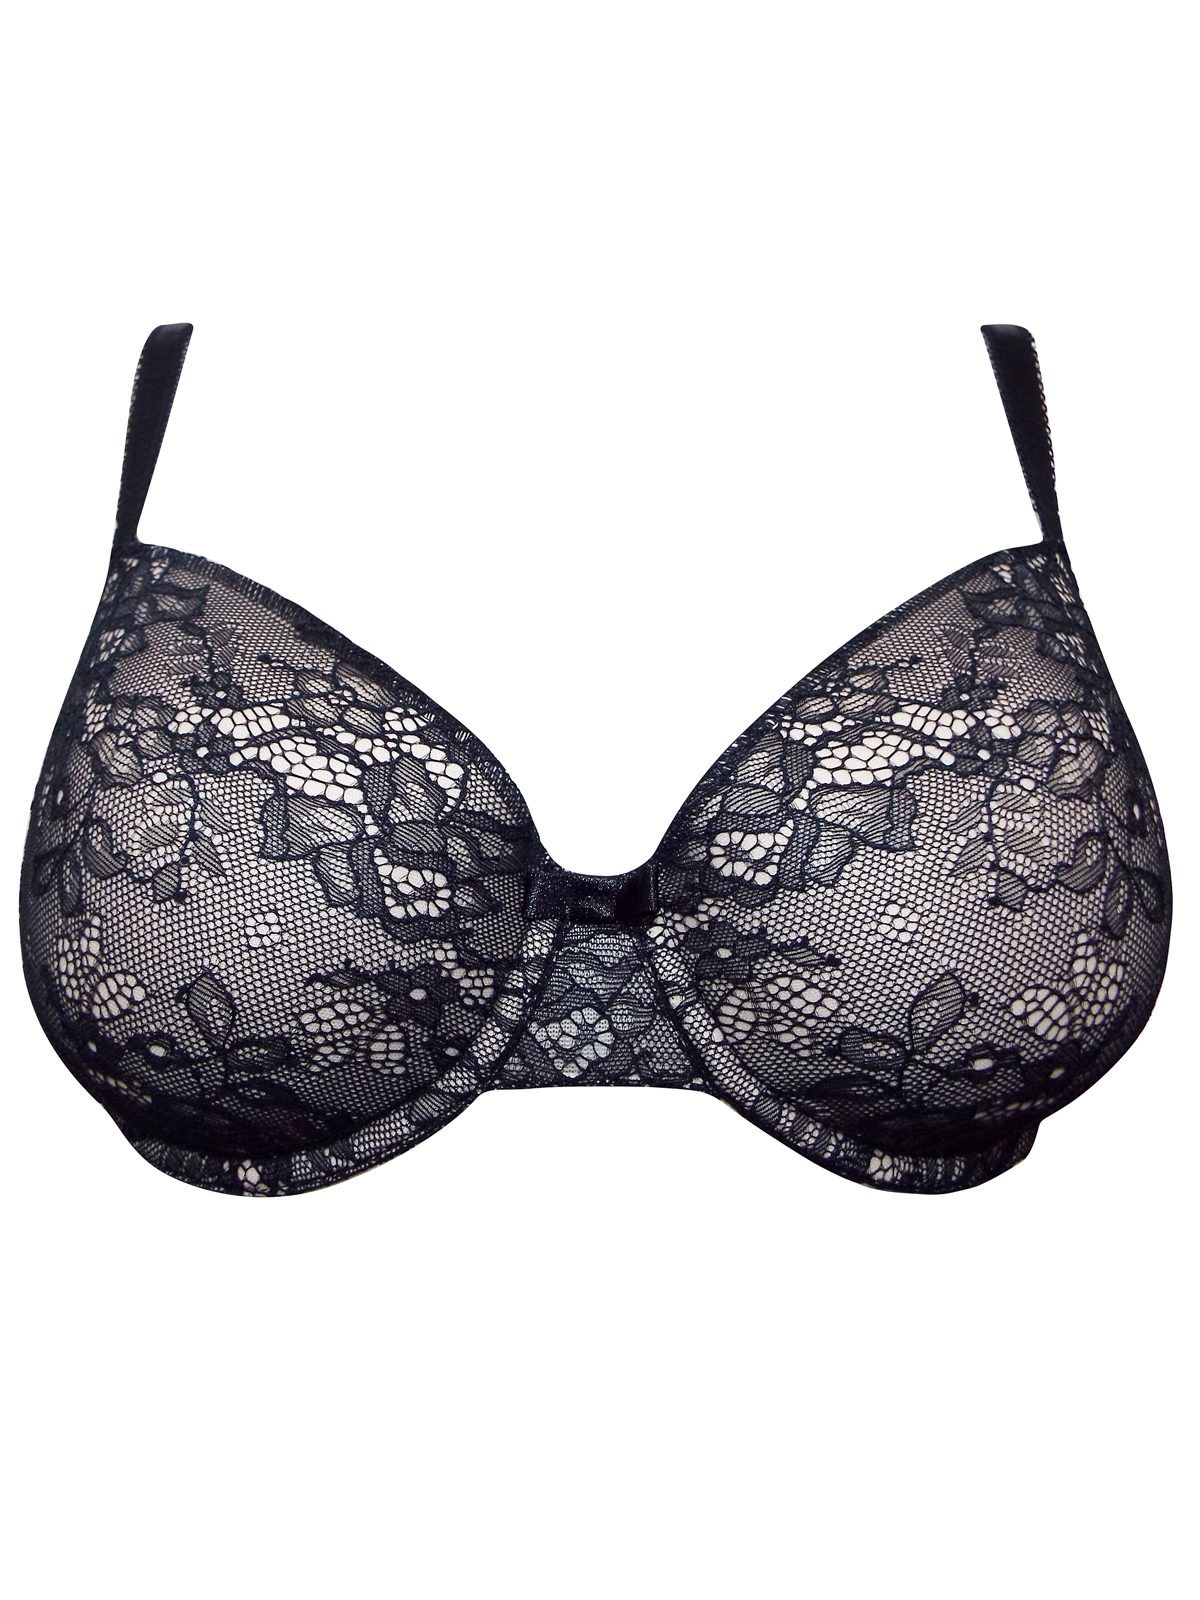 George - - BLACK Lace Padded Full Cup T-Shirt Bra - Size 34 to 40